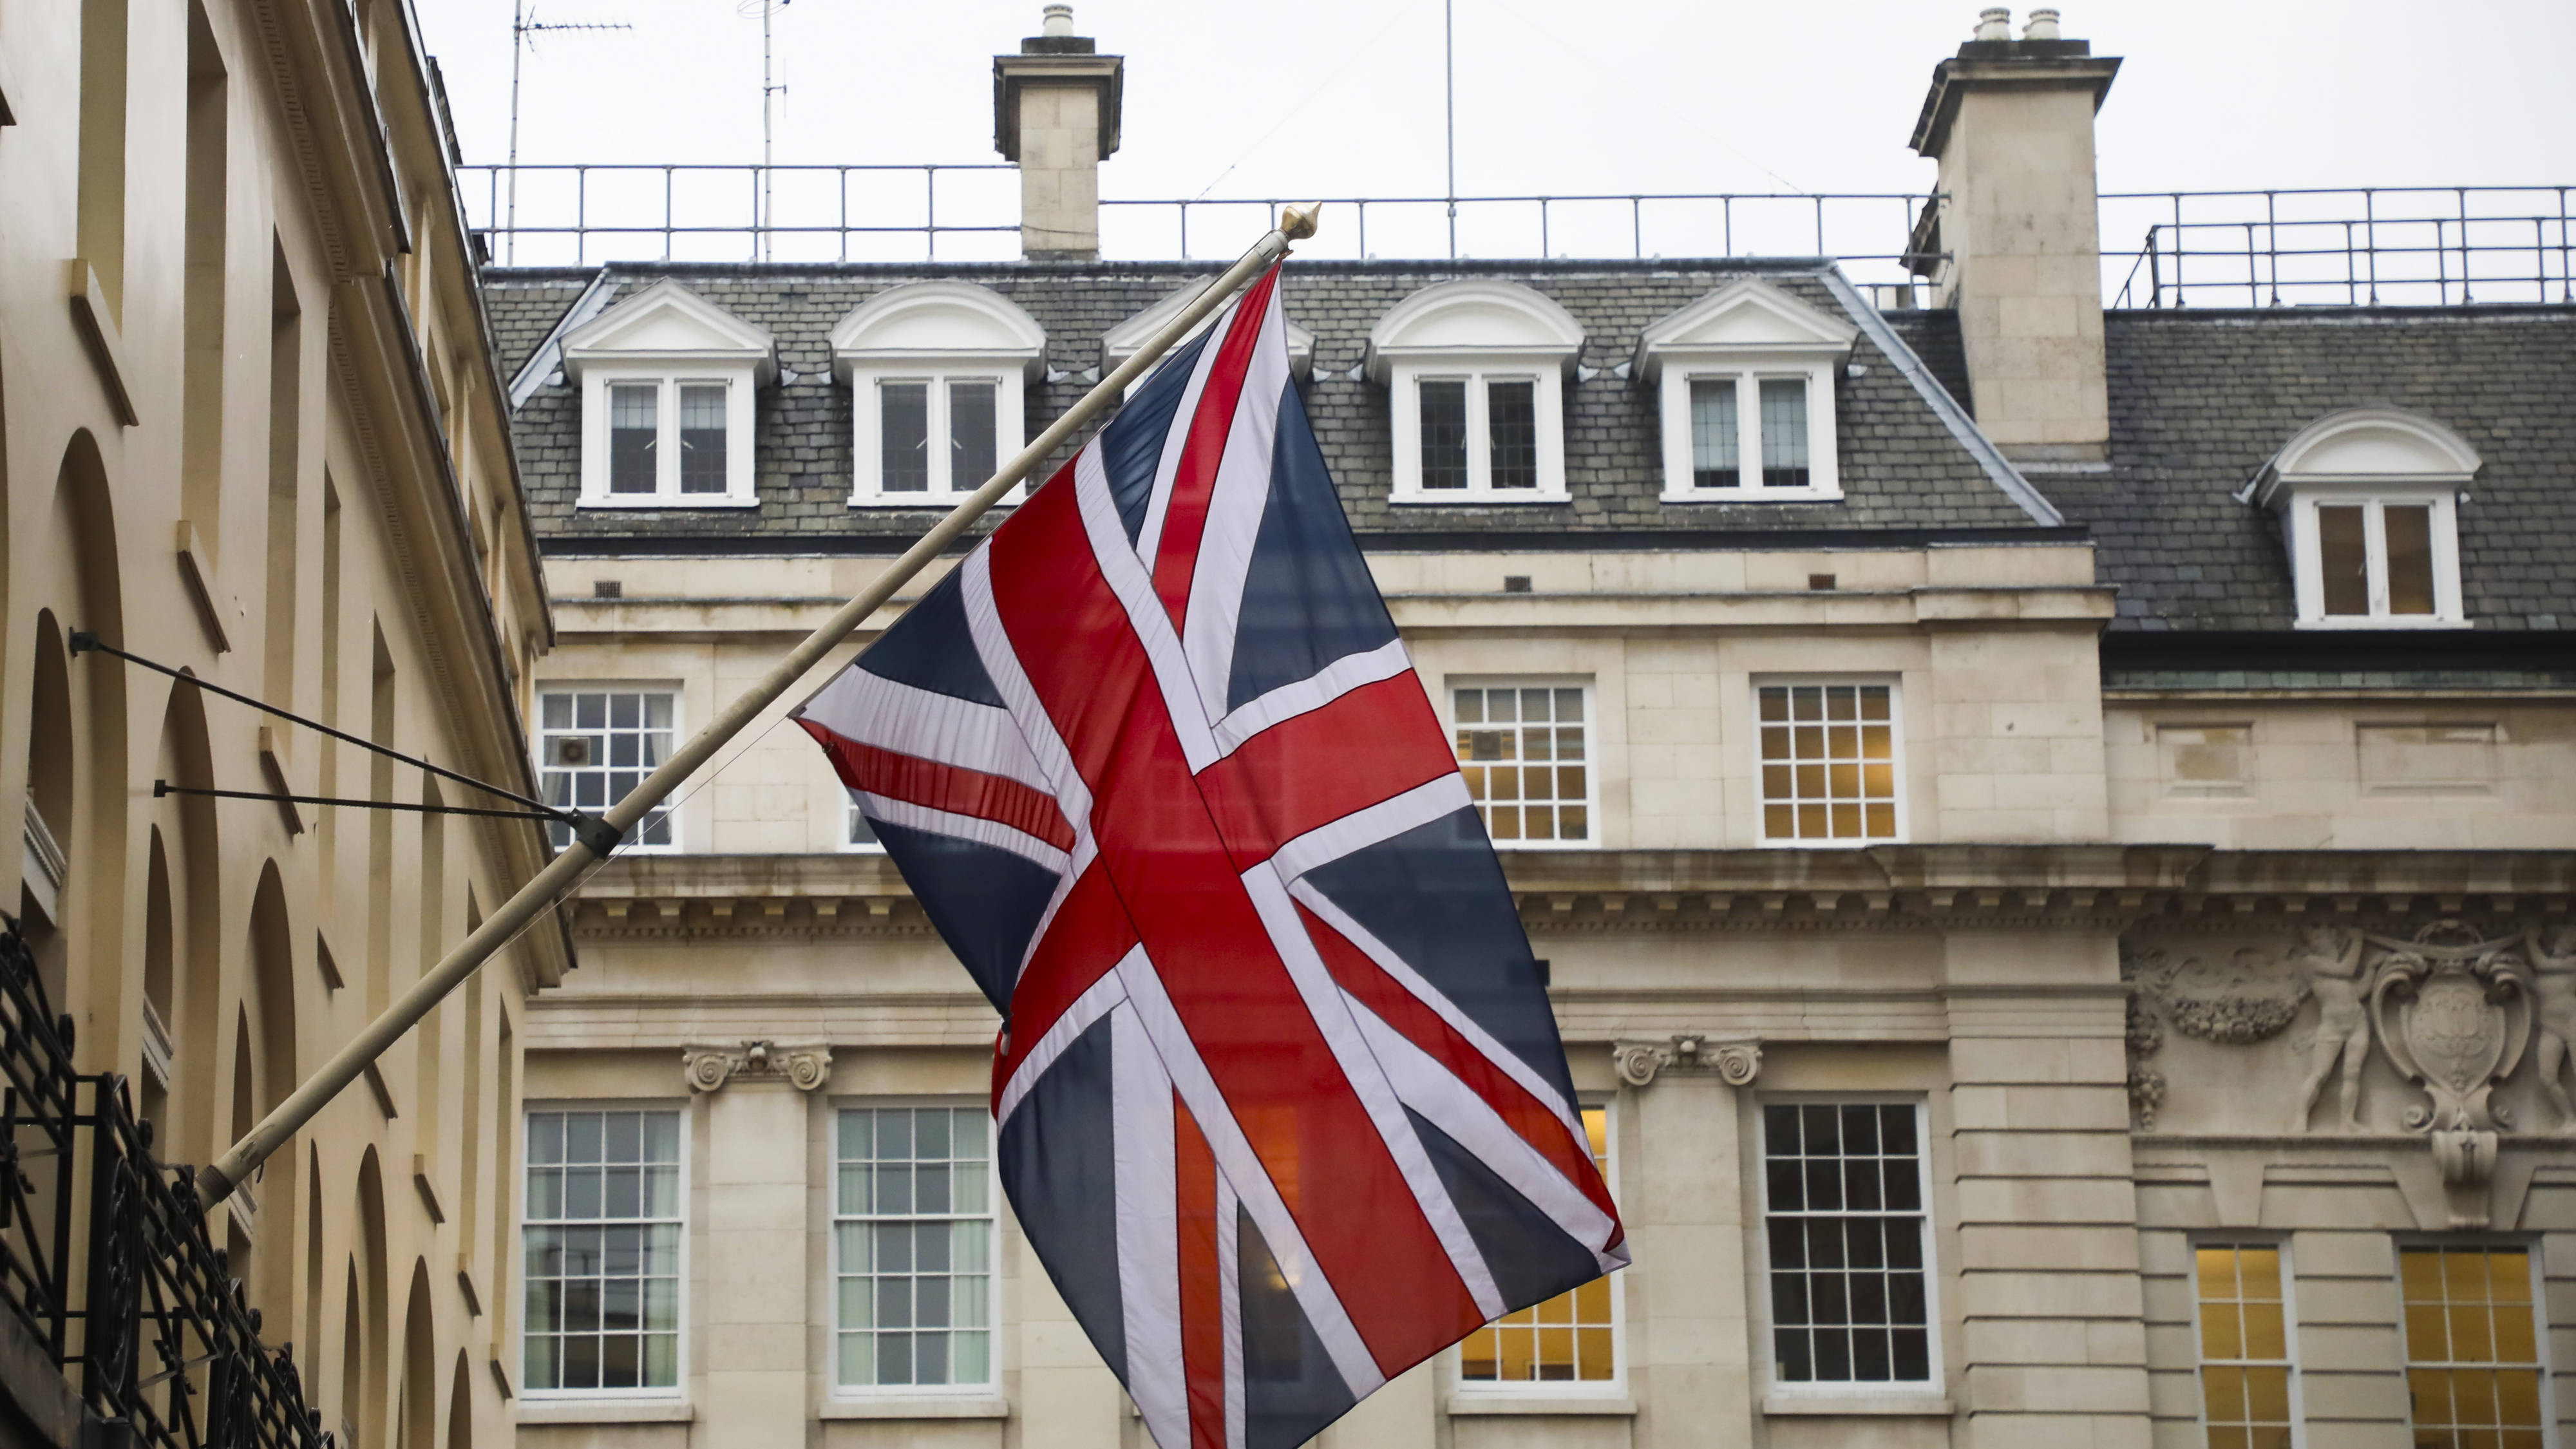 Union flag to be flown daily above all government buildings under new  guidance - LBC